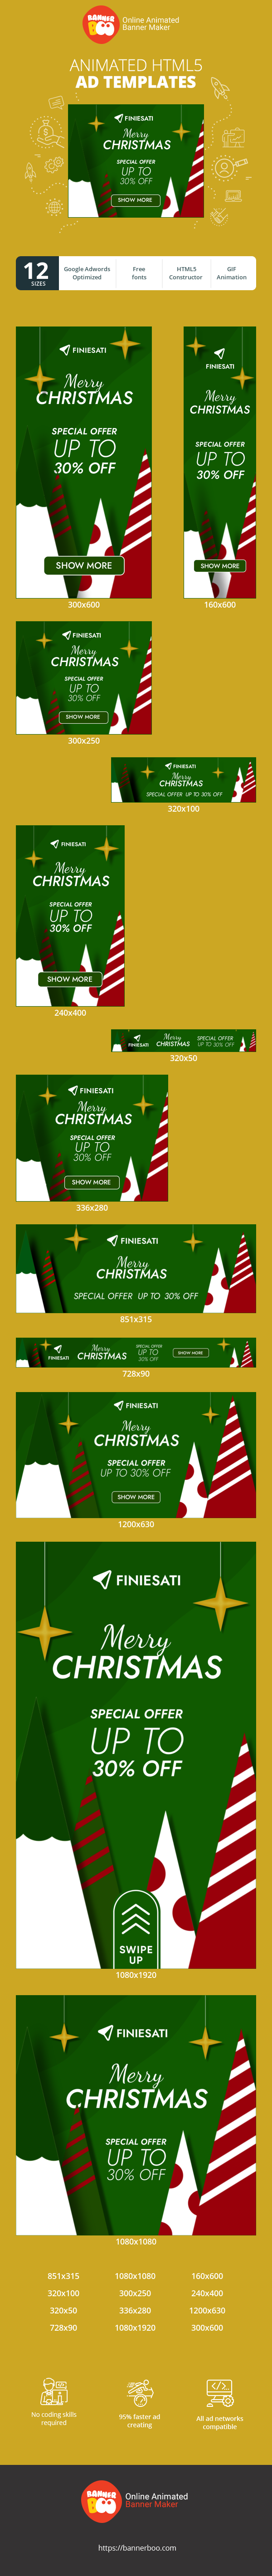 Mery Christmas — Special Offer Up To 30% Off